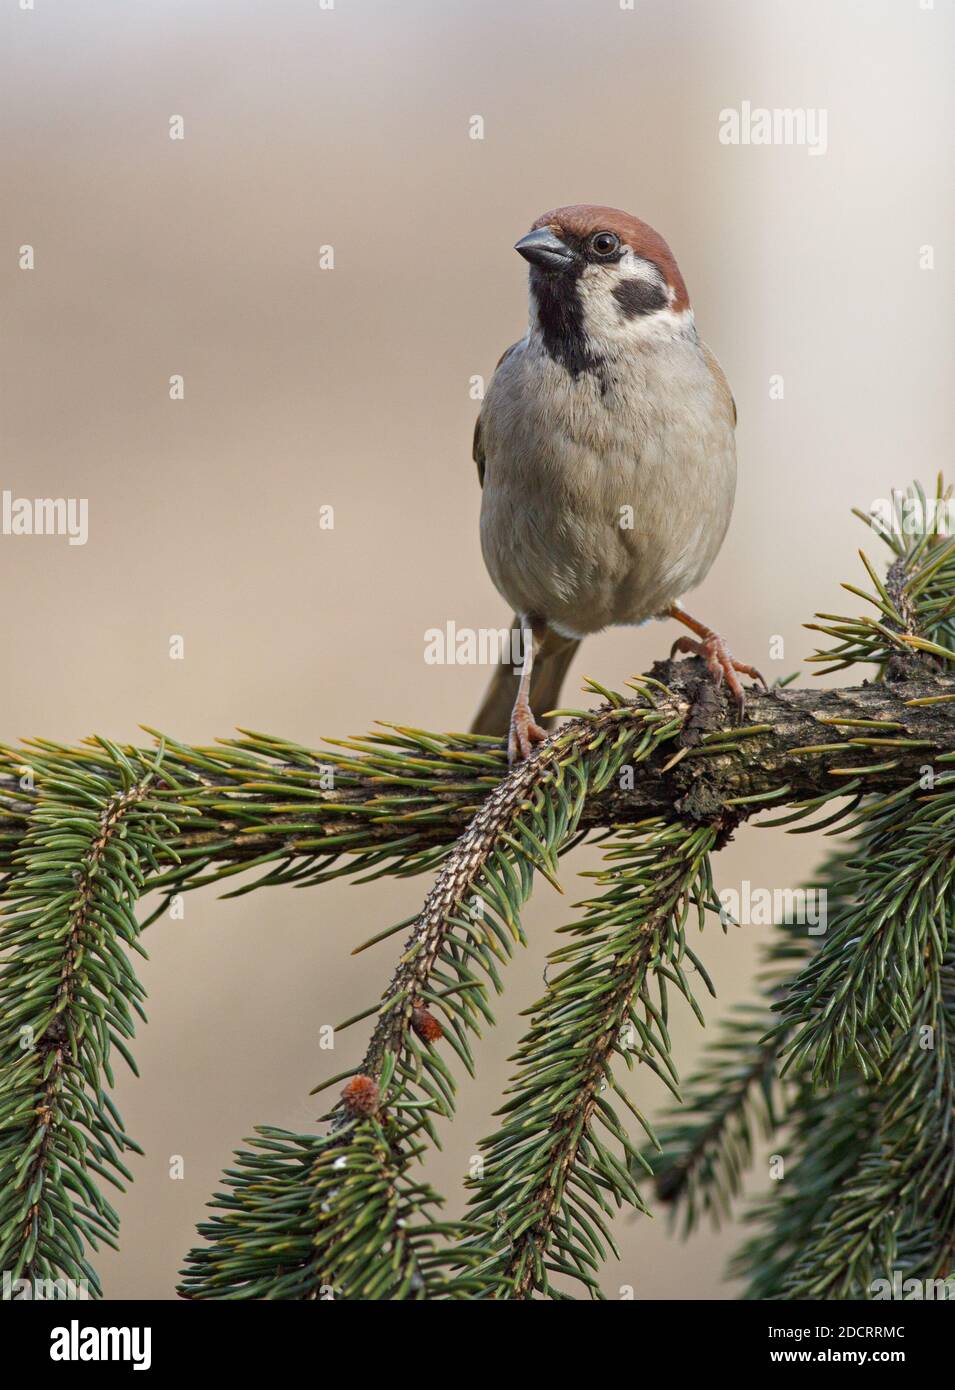 Portrait tree sparrow (Passer montanus) sitting on pine tree branch with isolated background and copy space. Stock Photo